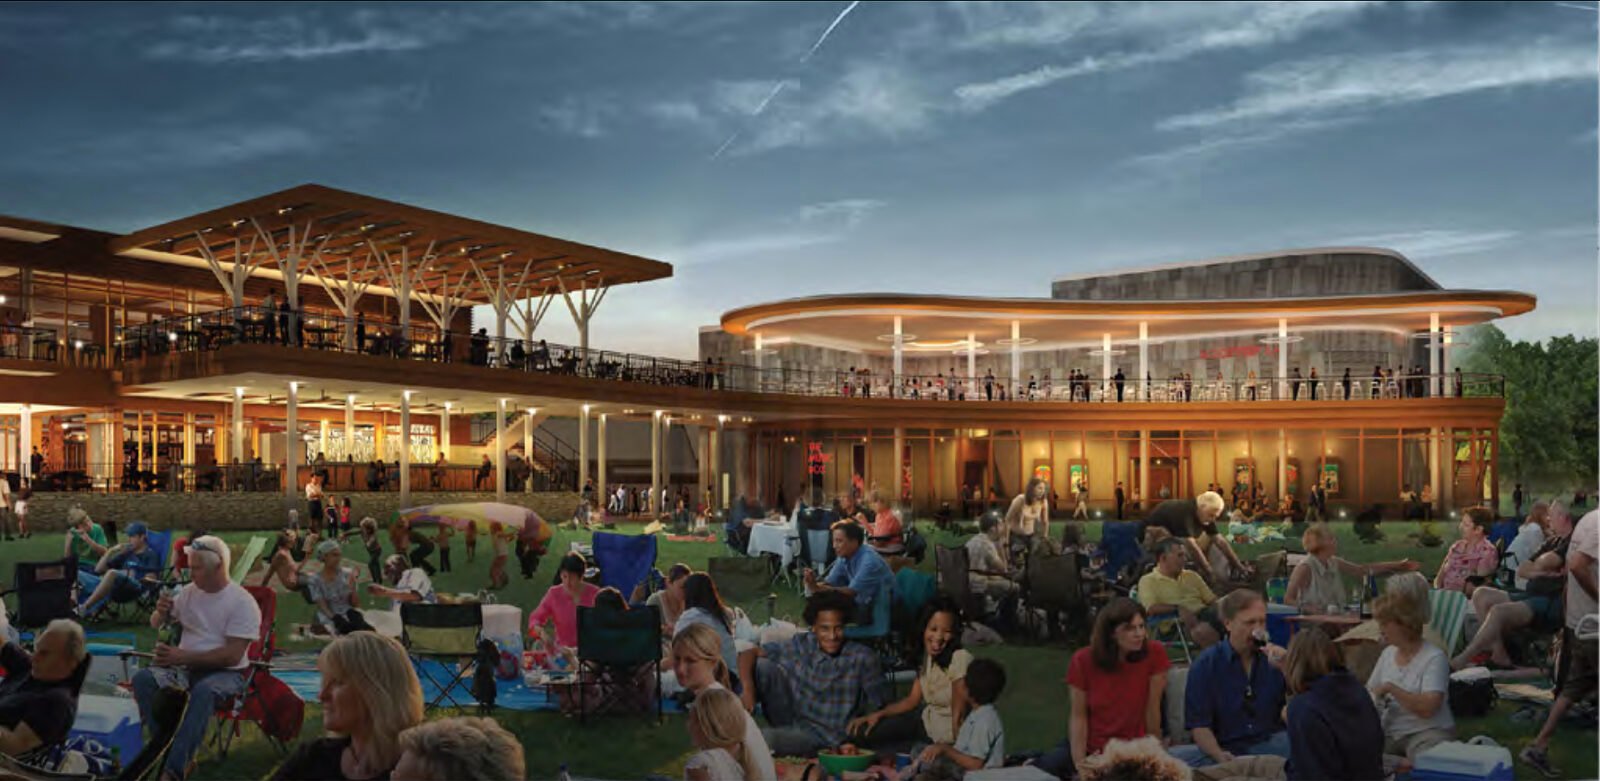 Ravinia revamps dining options with the help of Michelinstarred Levy